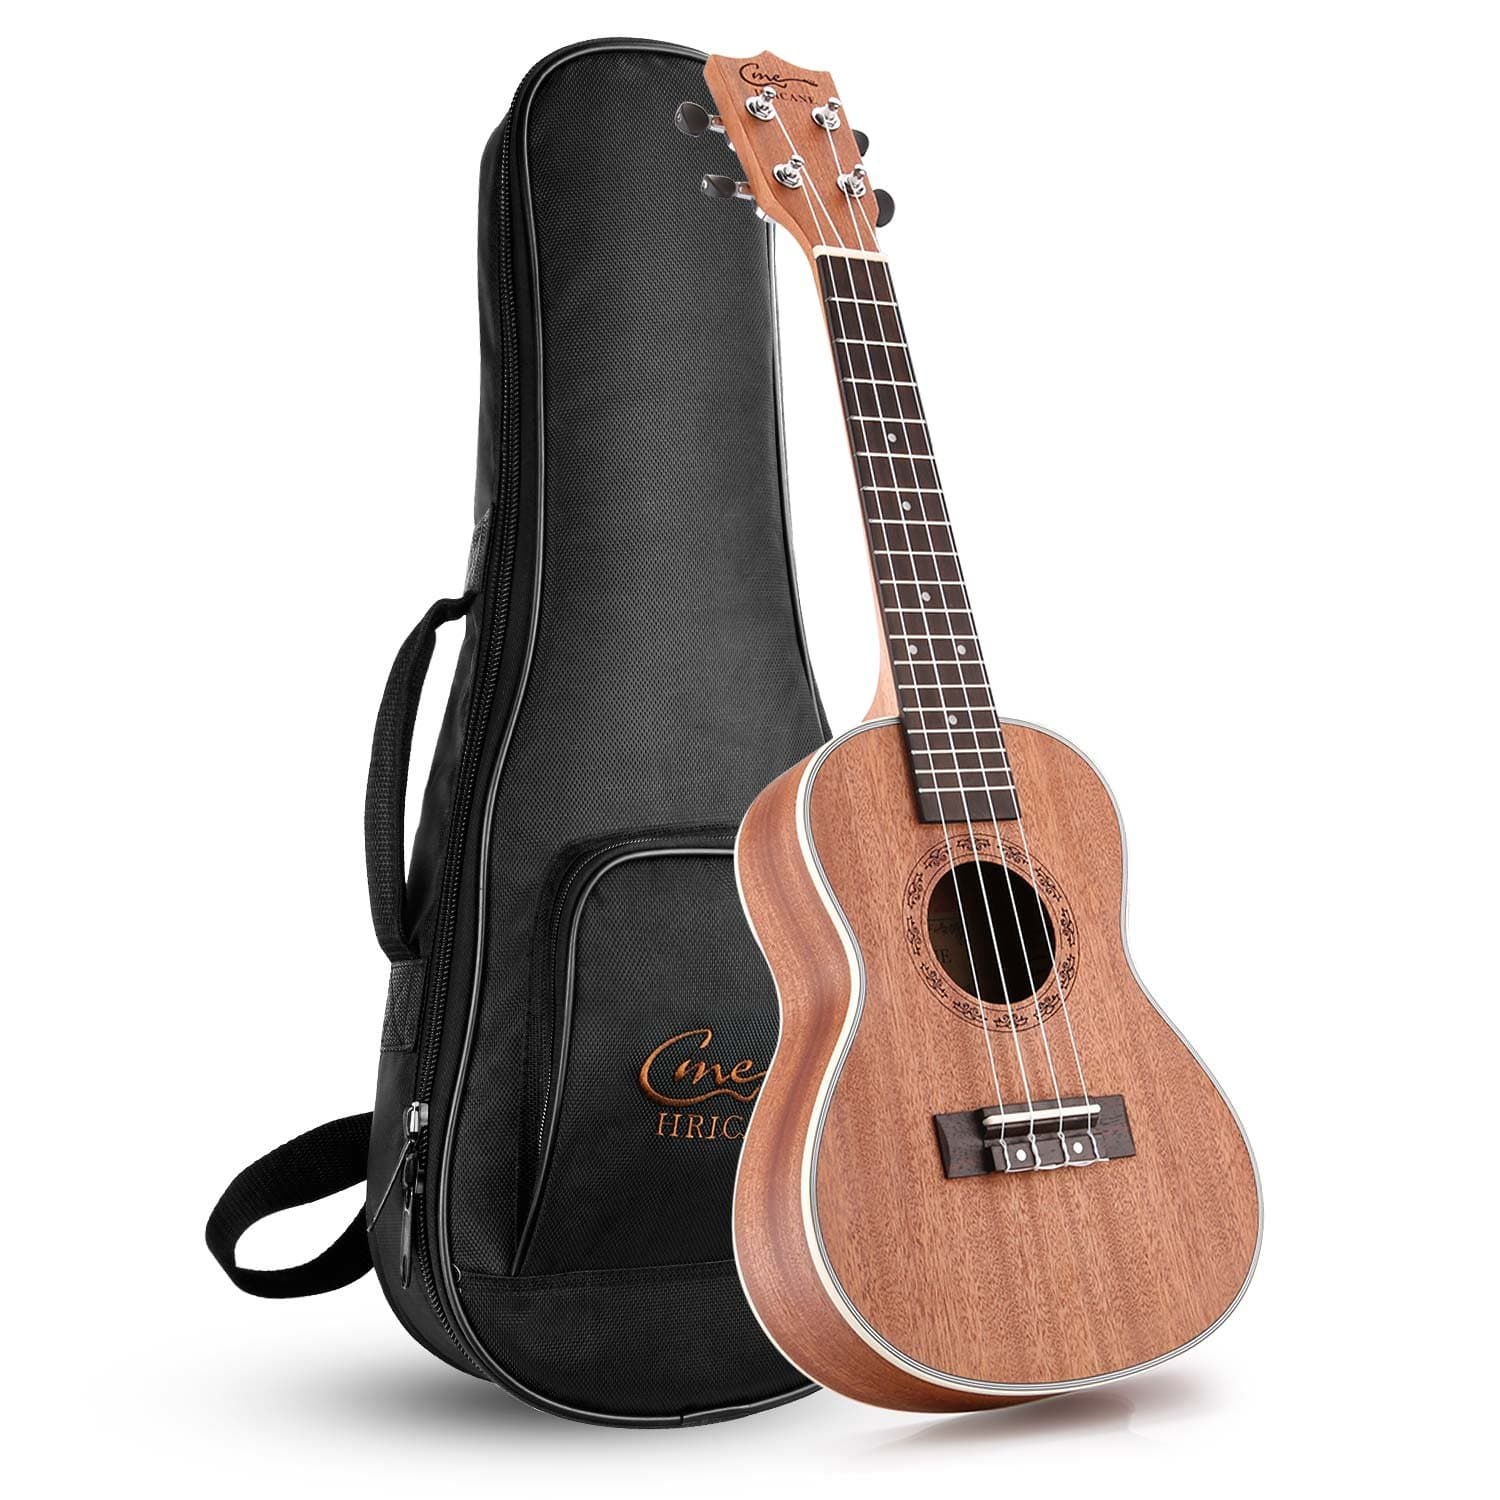 10 Best Concert Ukuleles Reviewed in Detail [May 2022]